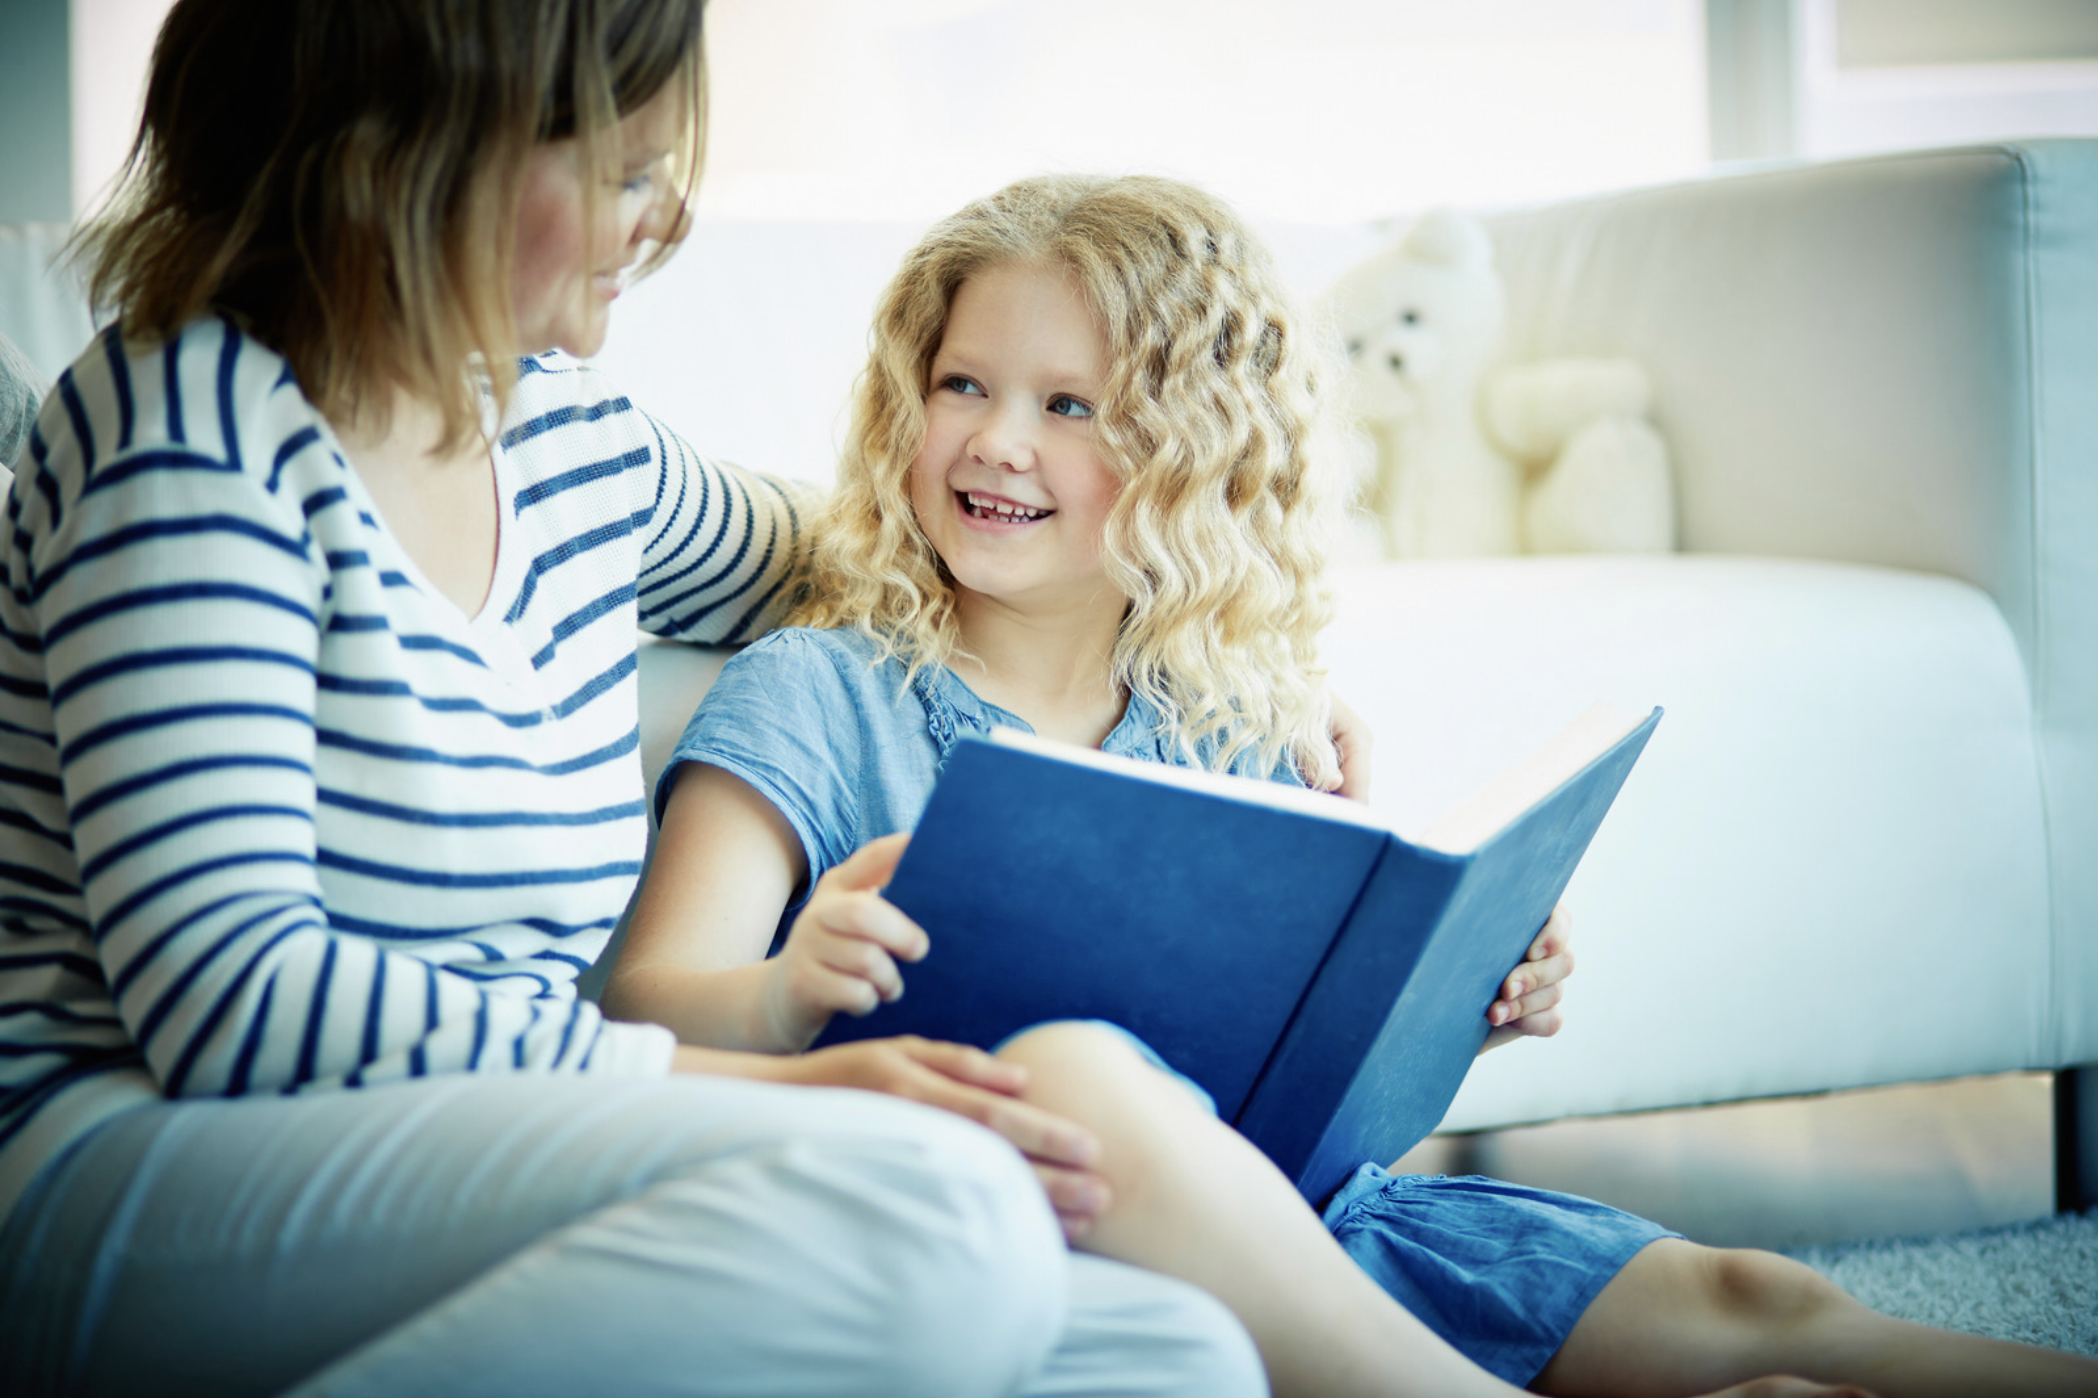 mother and daughter sitting together with a book. Daughter is looking at mother with a smile